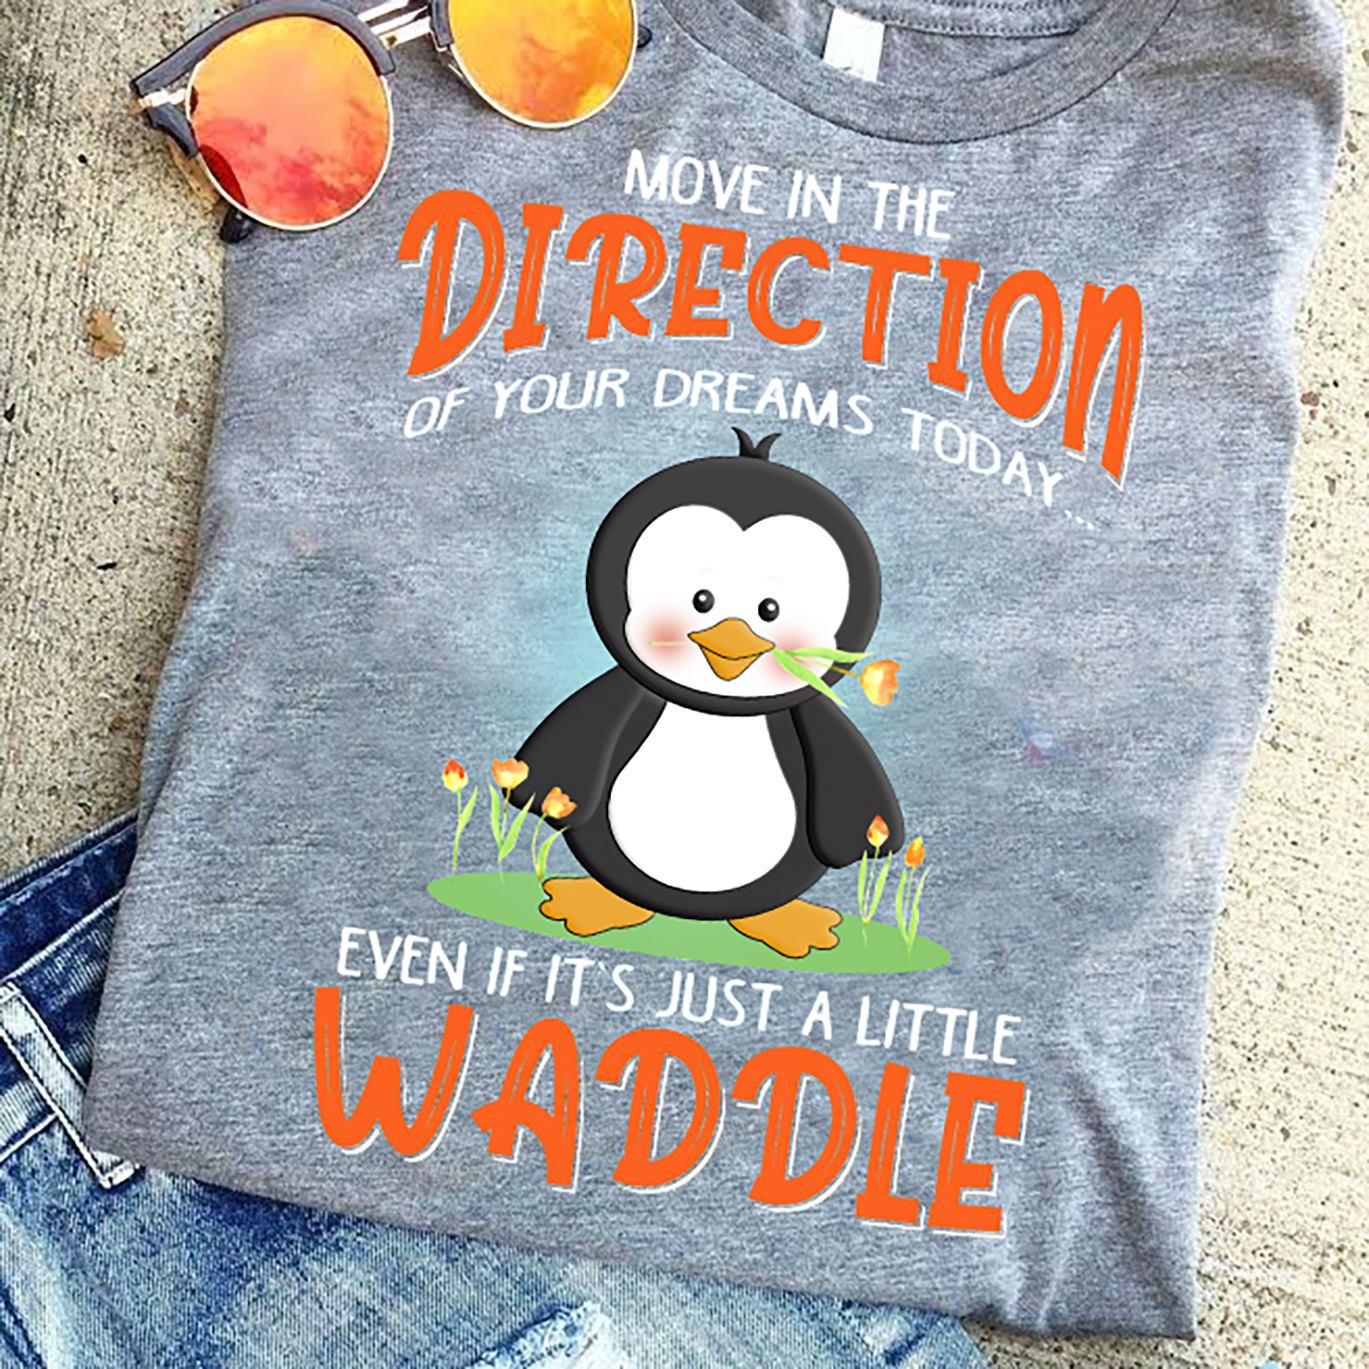 Move in the derection of your dreams today Even if it's just a little waddle - Penguins